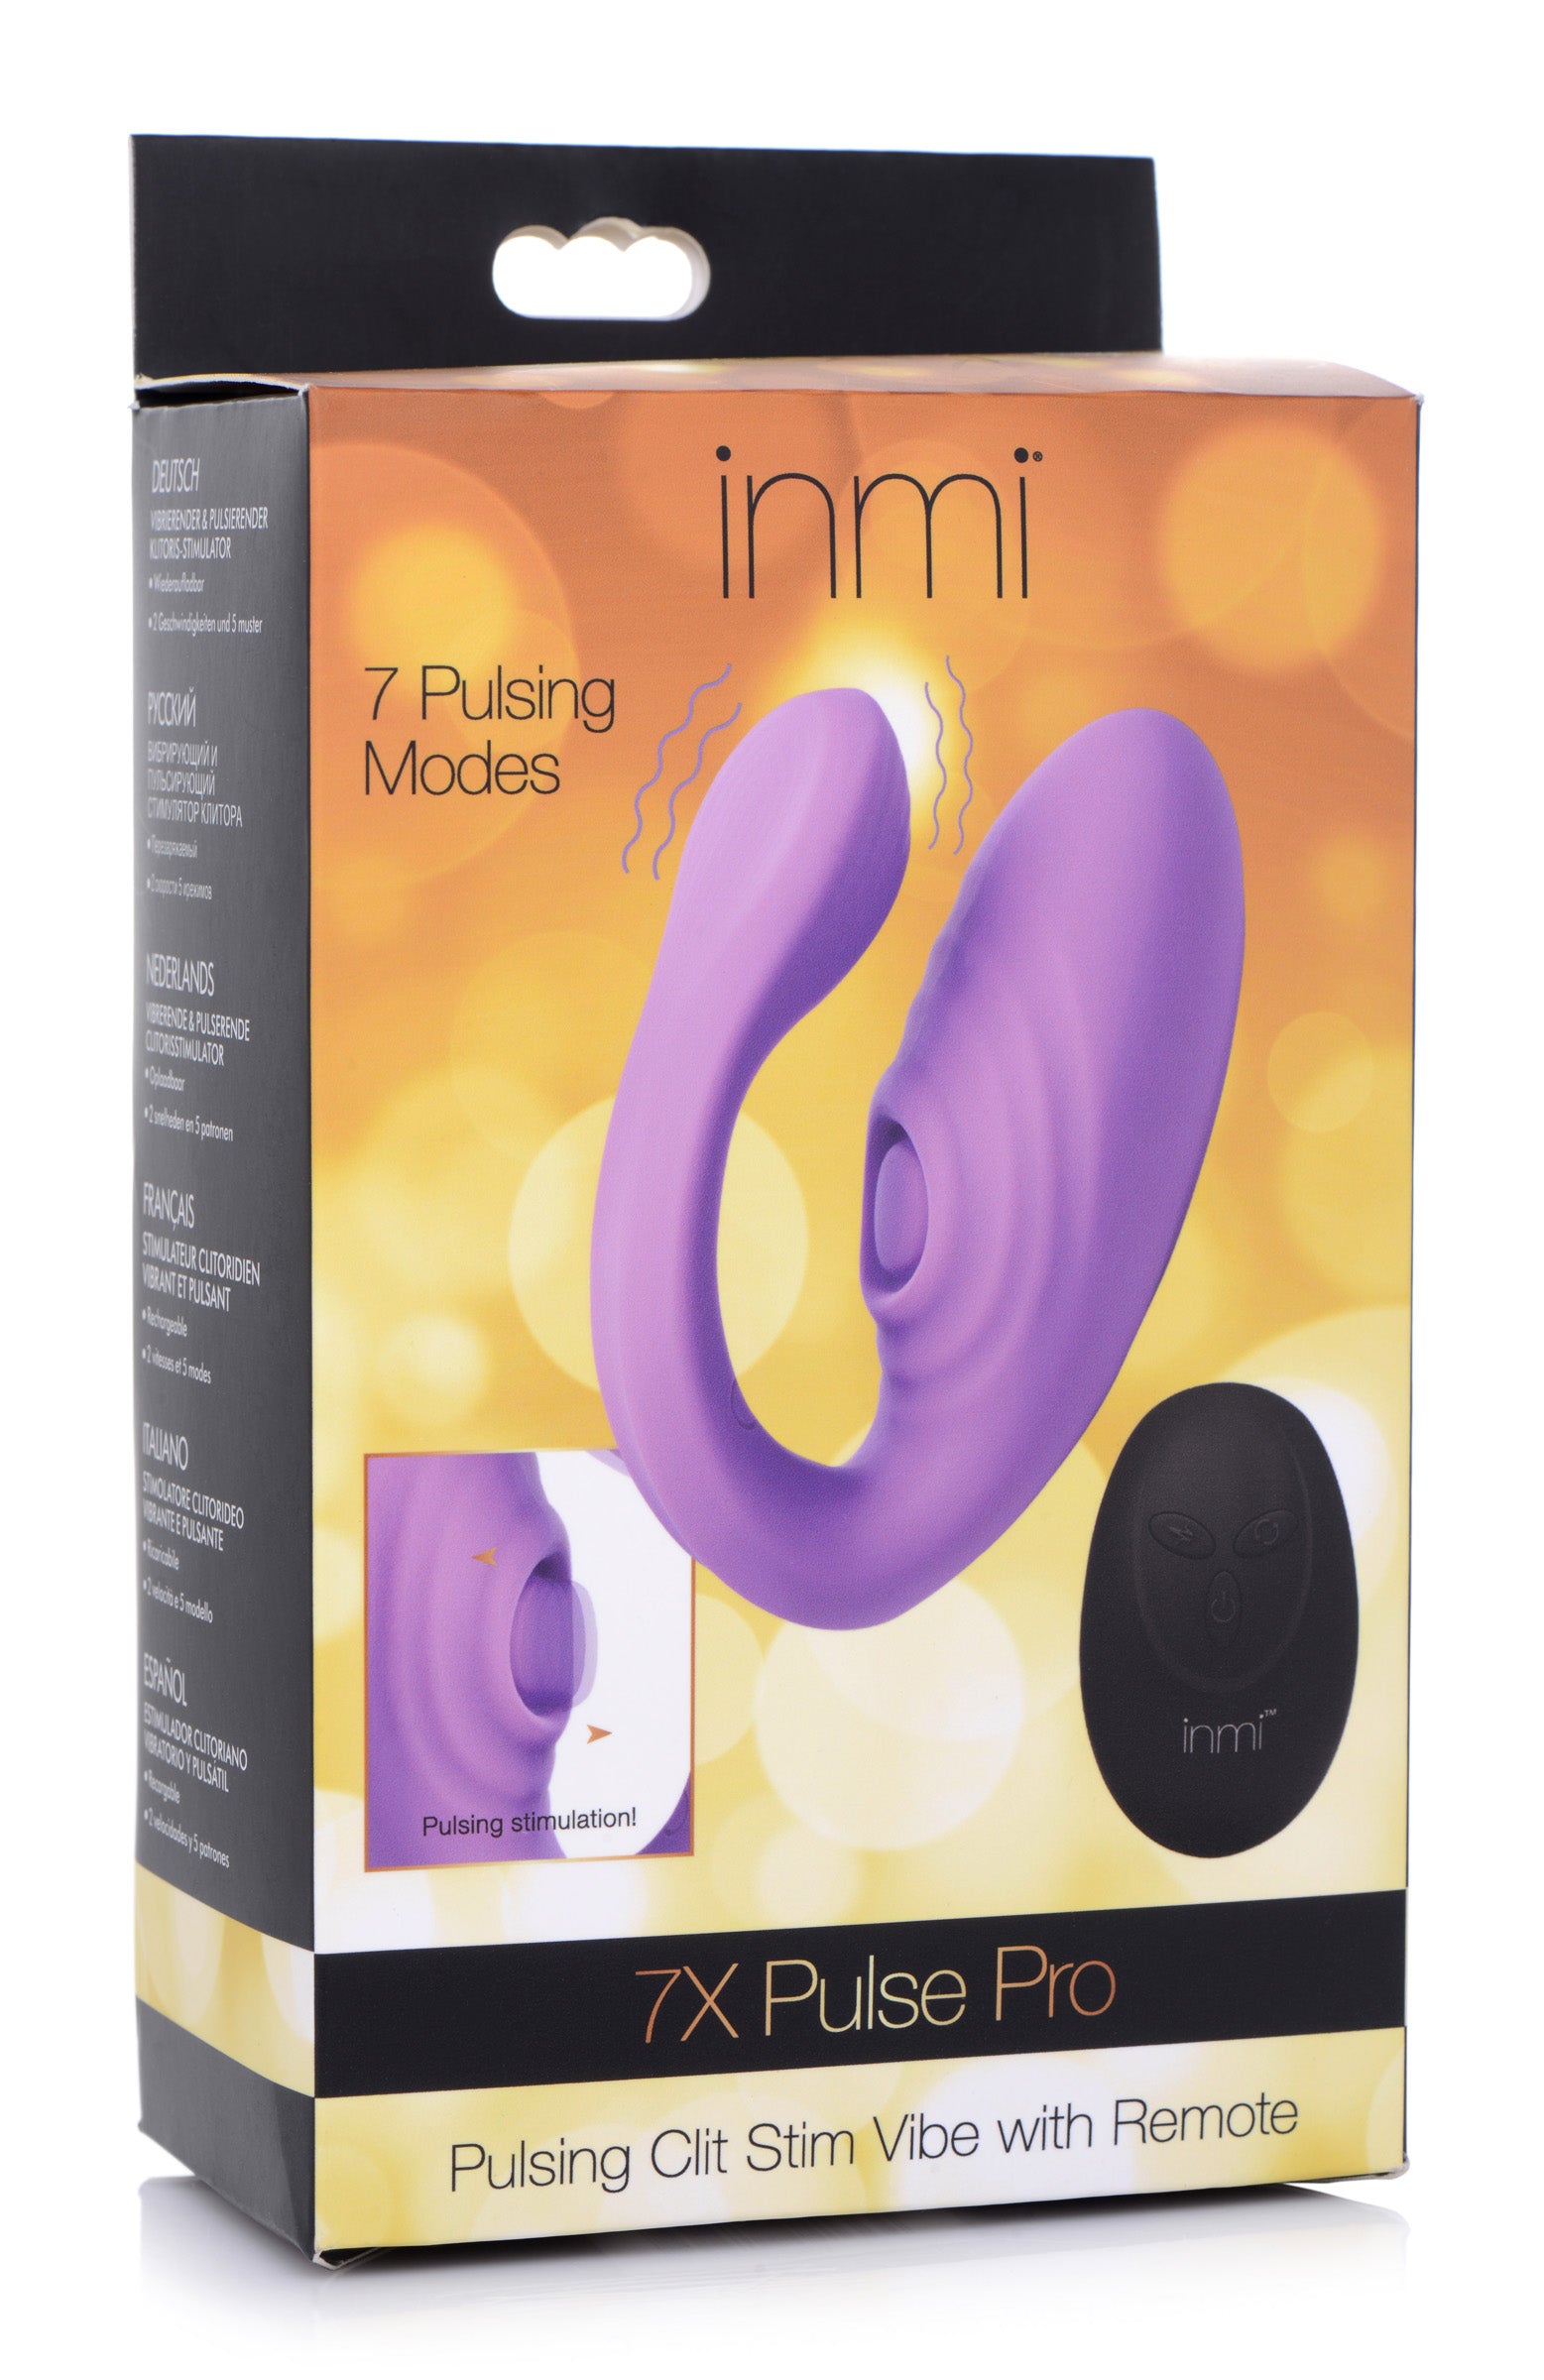 7X Pulse Pro Pulsating and Clit Stimulating Vibrator with Remote Control - UABDSM